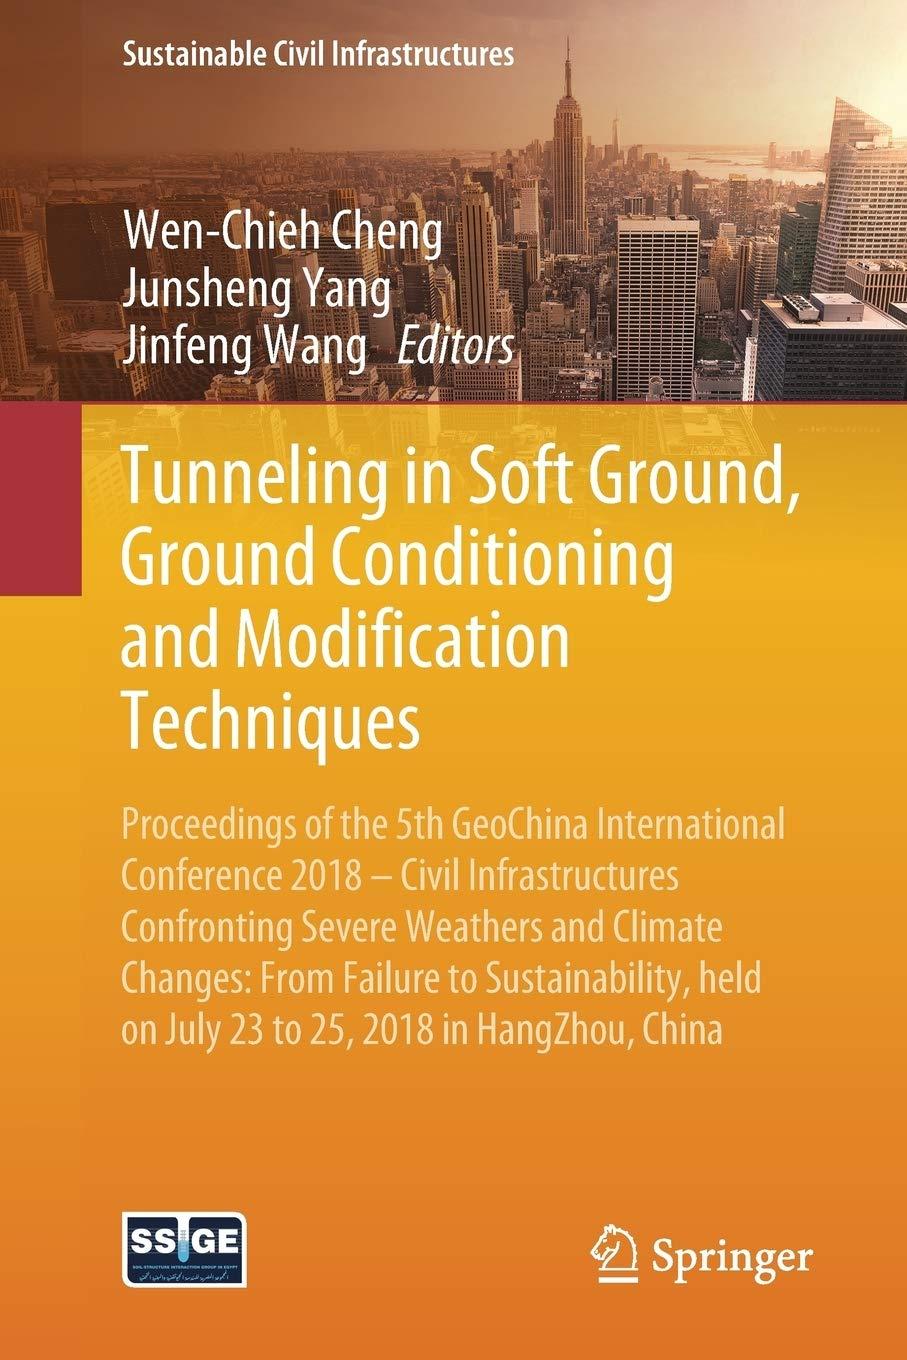 tunneling in soft ground, ground conditioning and modification techniques proceedings of the 5th geochina